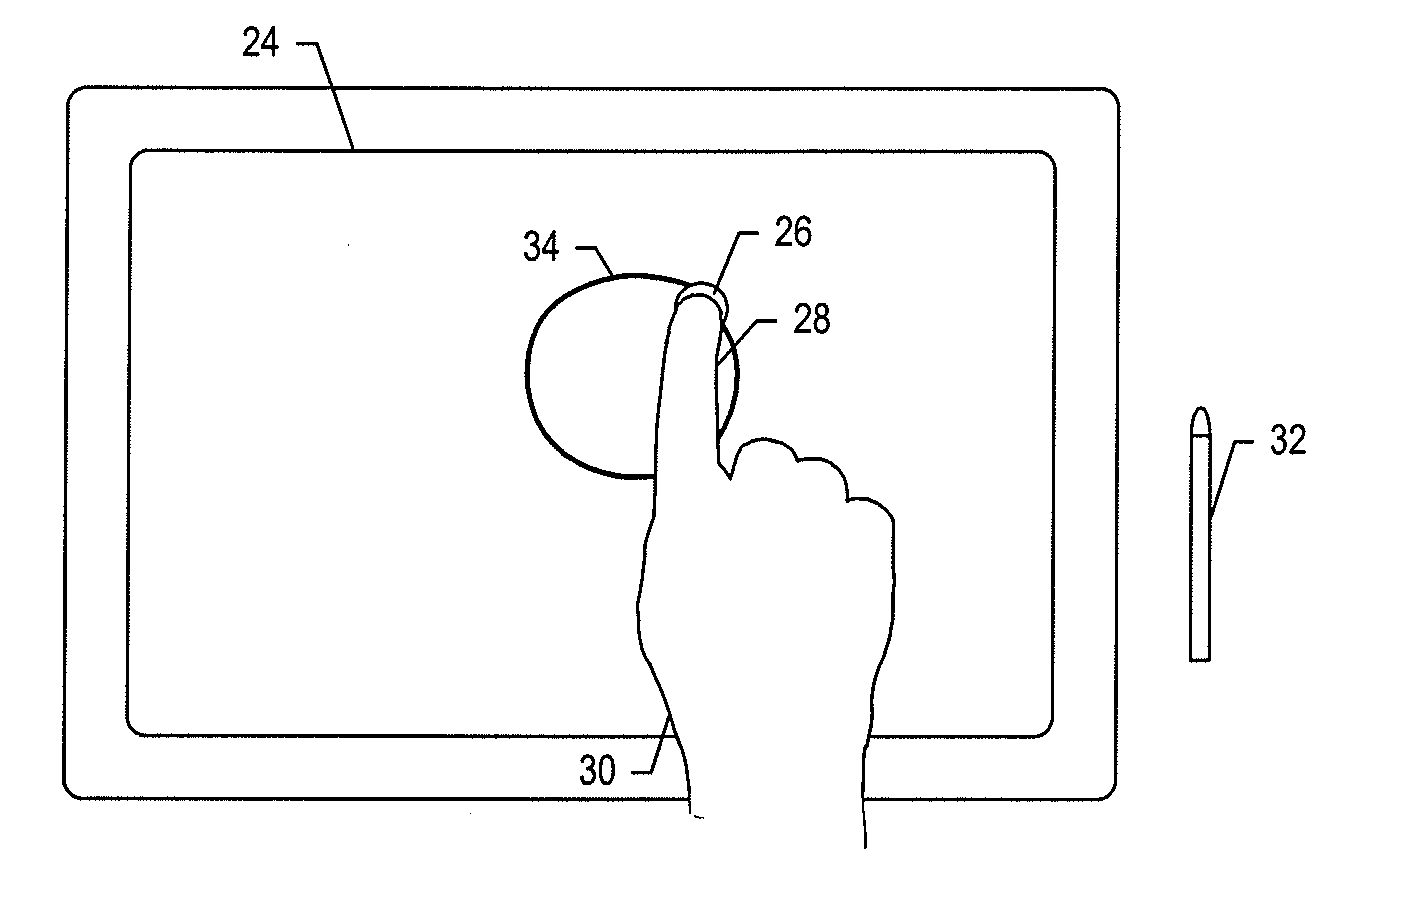 Apparatus for providing touch feedback for user input to a touch sensitive surface